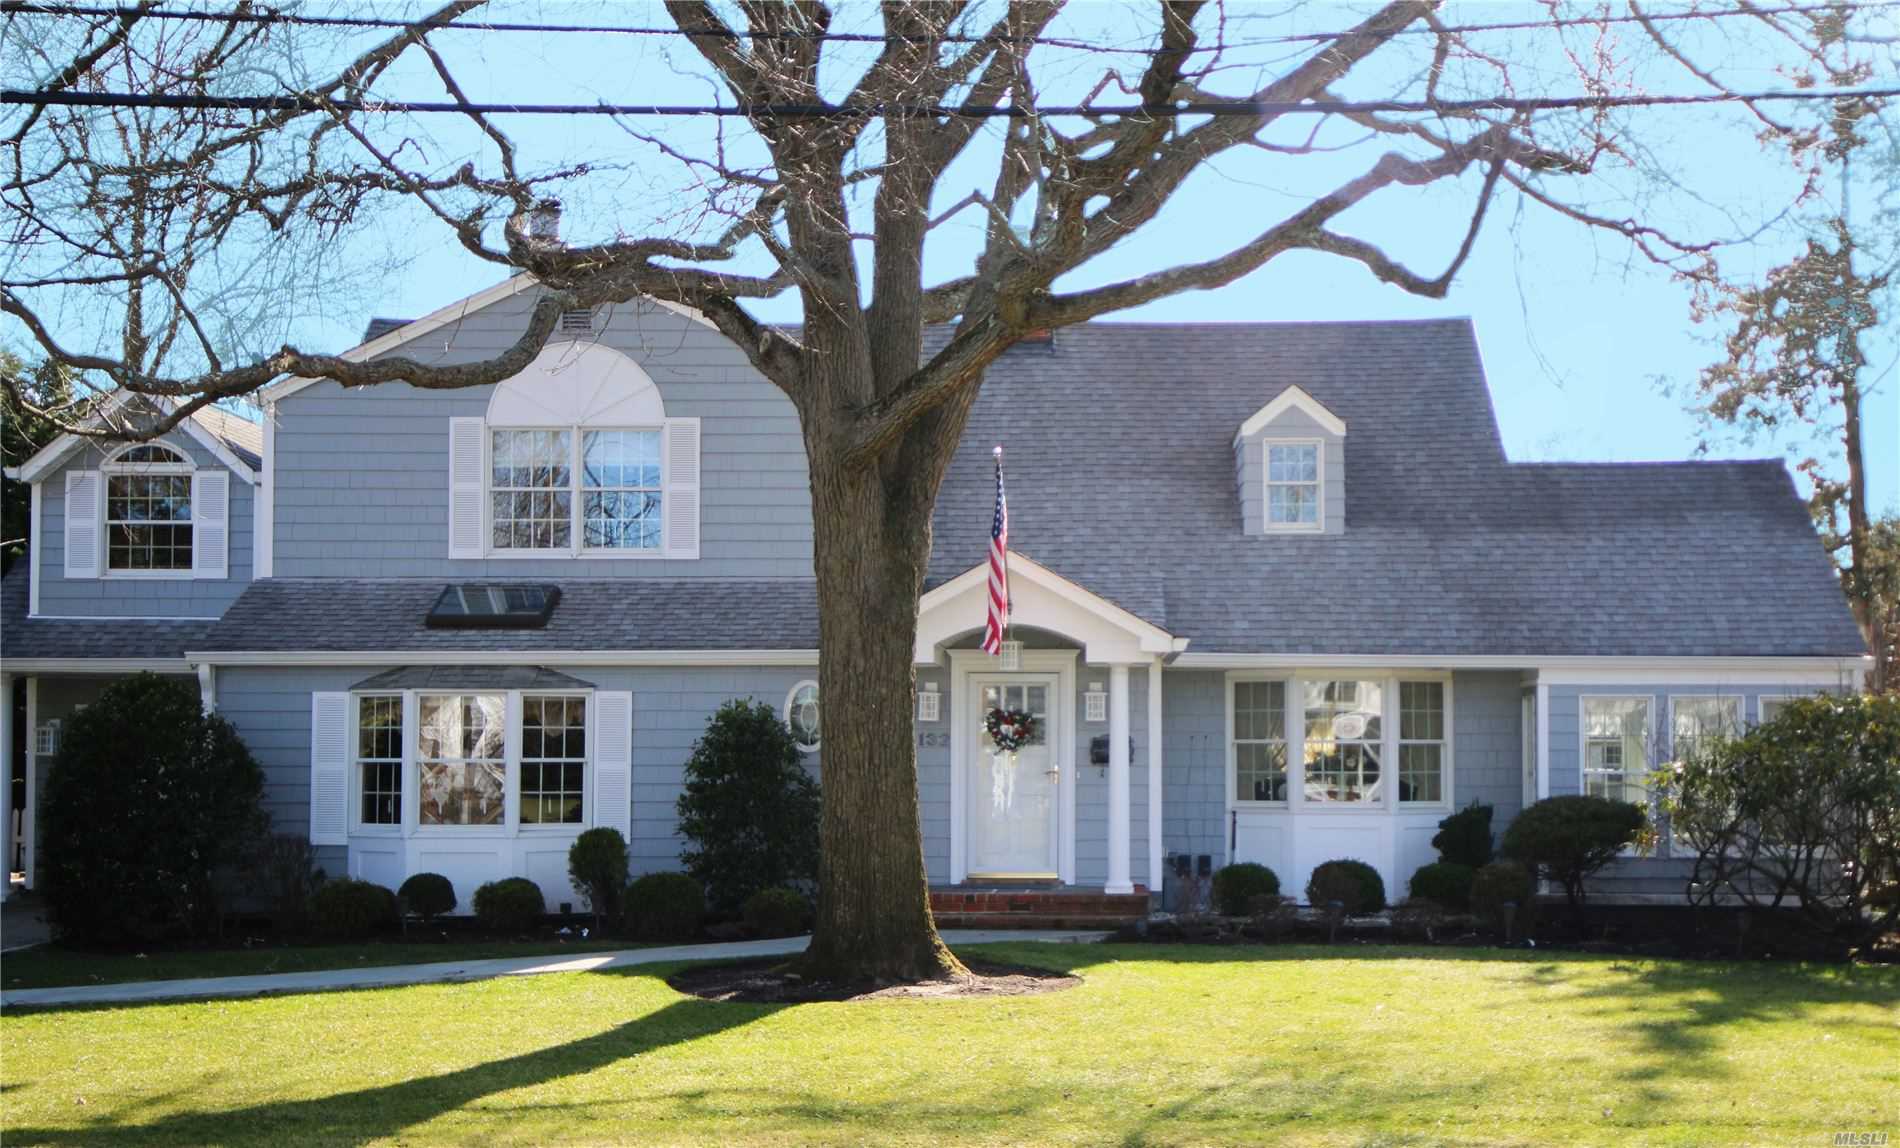 Stunning Center Hall Colonial in Prestigious Old Harbour Green* 1st Floor Boasts: Beautiful Large Living Rm w/ Gas Frplce & Mahogany in-laid Hardwood Flrs w/ French Doors to Charming Heated Sun Rm* Banquet Dining Rm w/Wainscoting* Gorgeous Granite Eat-in-Kit w/Skylight* Skylit Den w 2nd Frplce & Lovely Pwdr Rm* 2nd Floor Boasts: Master Suite w/ New Marble Bath plus 3 Additional Bdrms w/2nd Bth & Upstairs Laundry Rm* Radiant Ht in Sunrm & All 3 Baths* Harbour Green Shore Club & Marina Eligibility